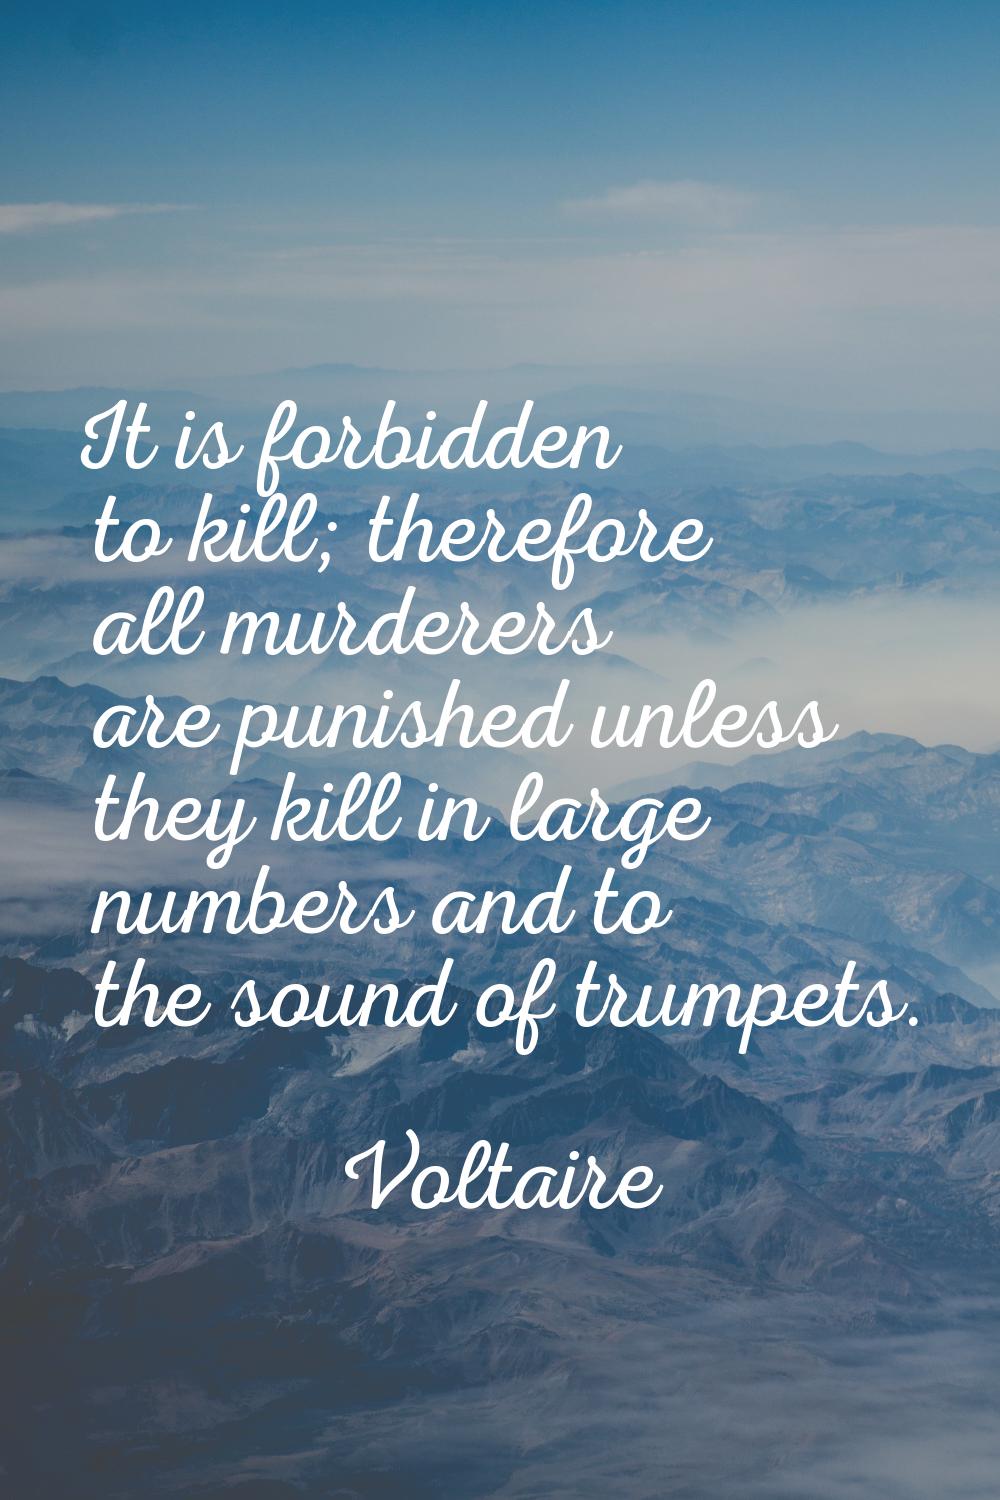 It is forbidden to kill; therefore all murderers are punished unless they kill in large numbers and